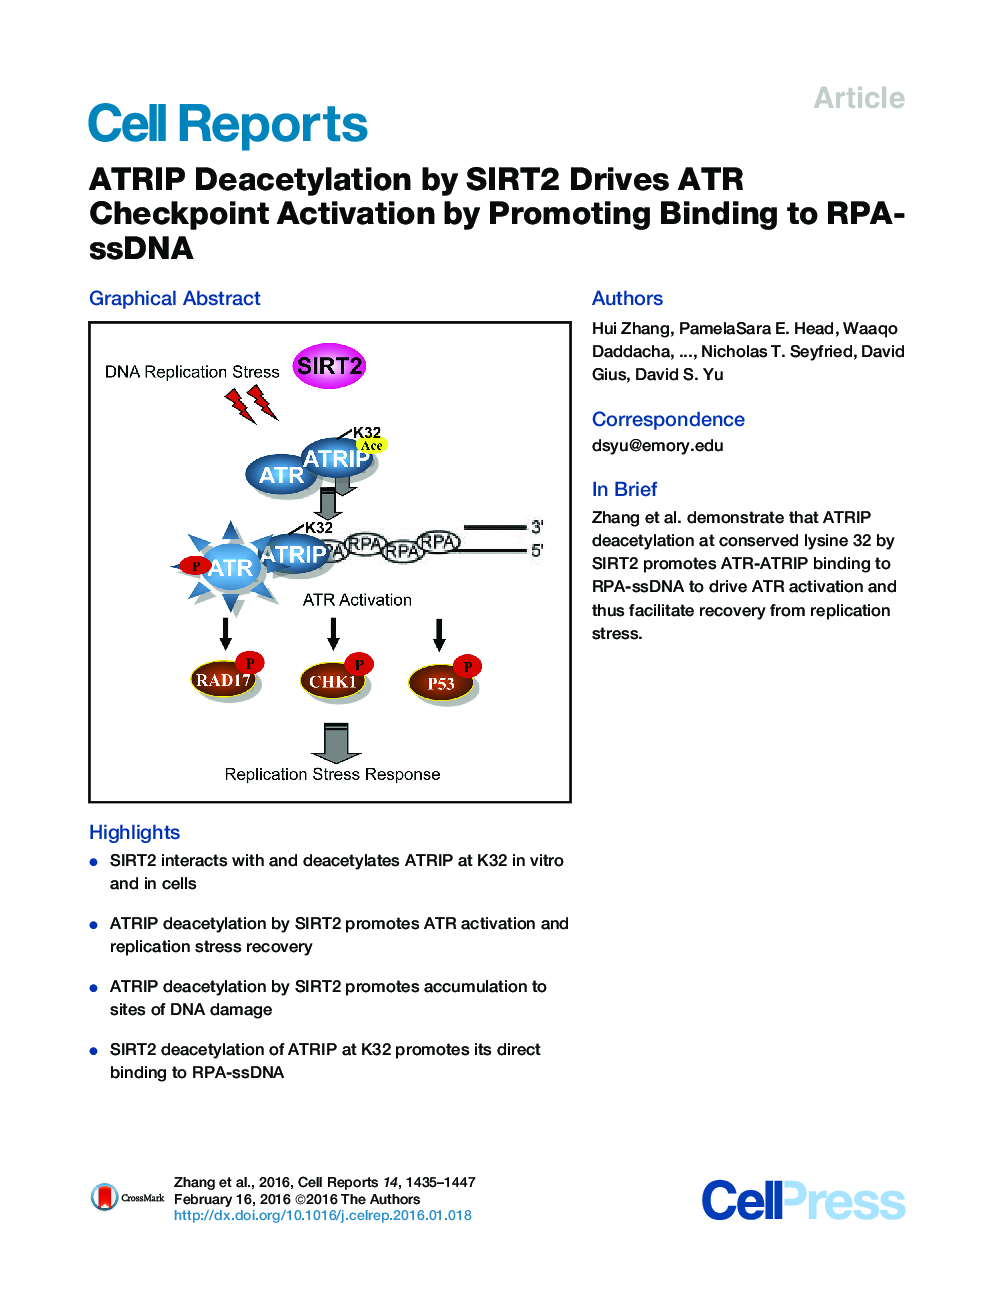 ATRIP Deacetylation by SIRT2 Drives ATR Checkpoint Activation by Promoting Binding to RPA-ssDNA 